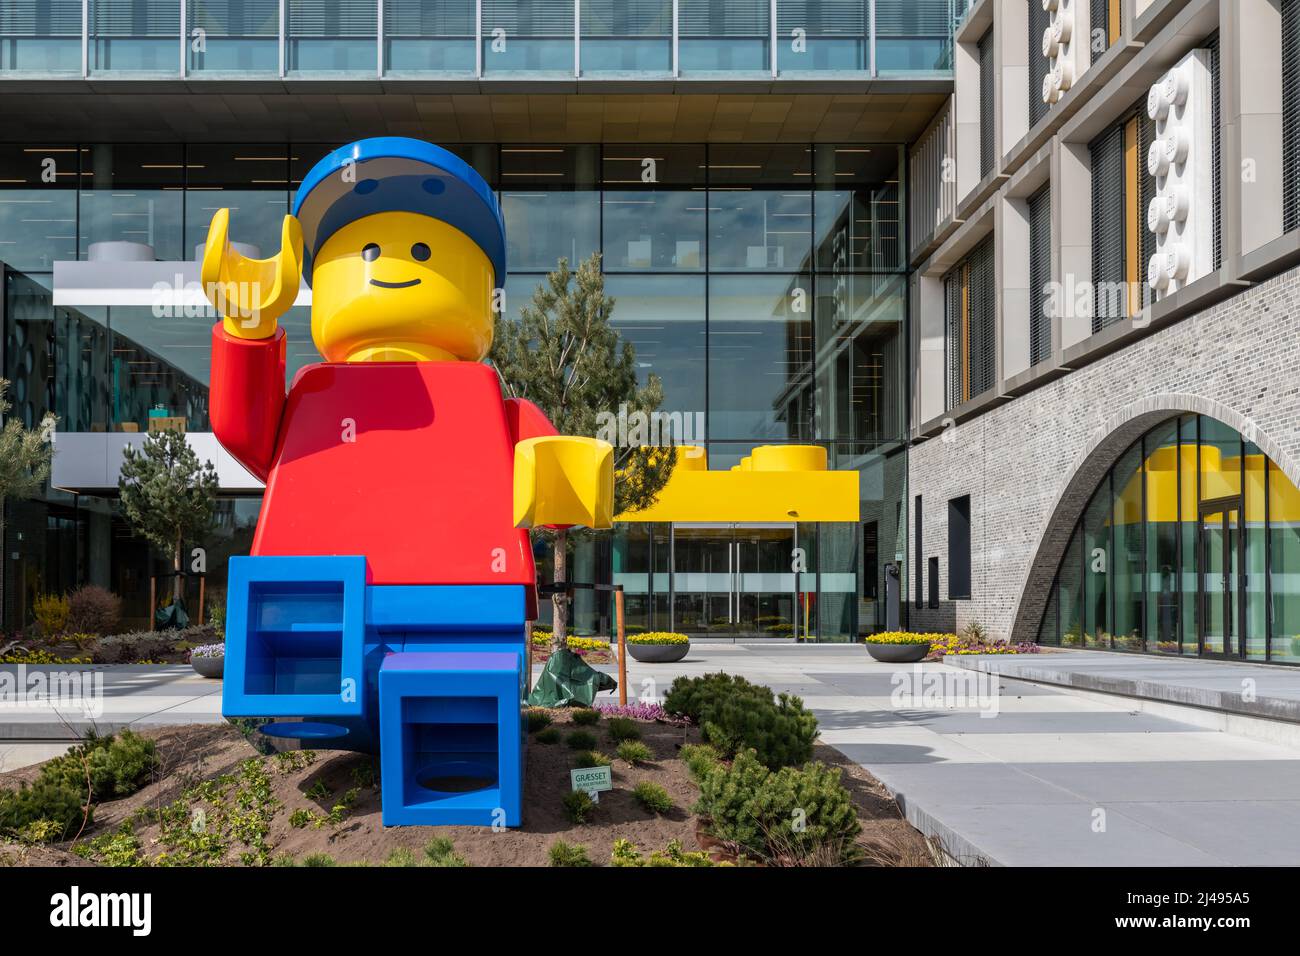 Billund, Denmark. 12th Apr, 2022. Outside the recently opened LEGO® Campus  Buildings in Billund, Denmark including a very large Lego minifigure.  Credit: Thomas Faull/Alamy Live News Stock Photo - Alamy